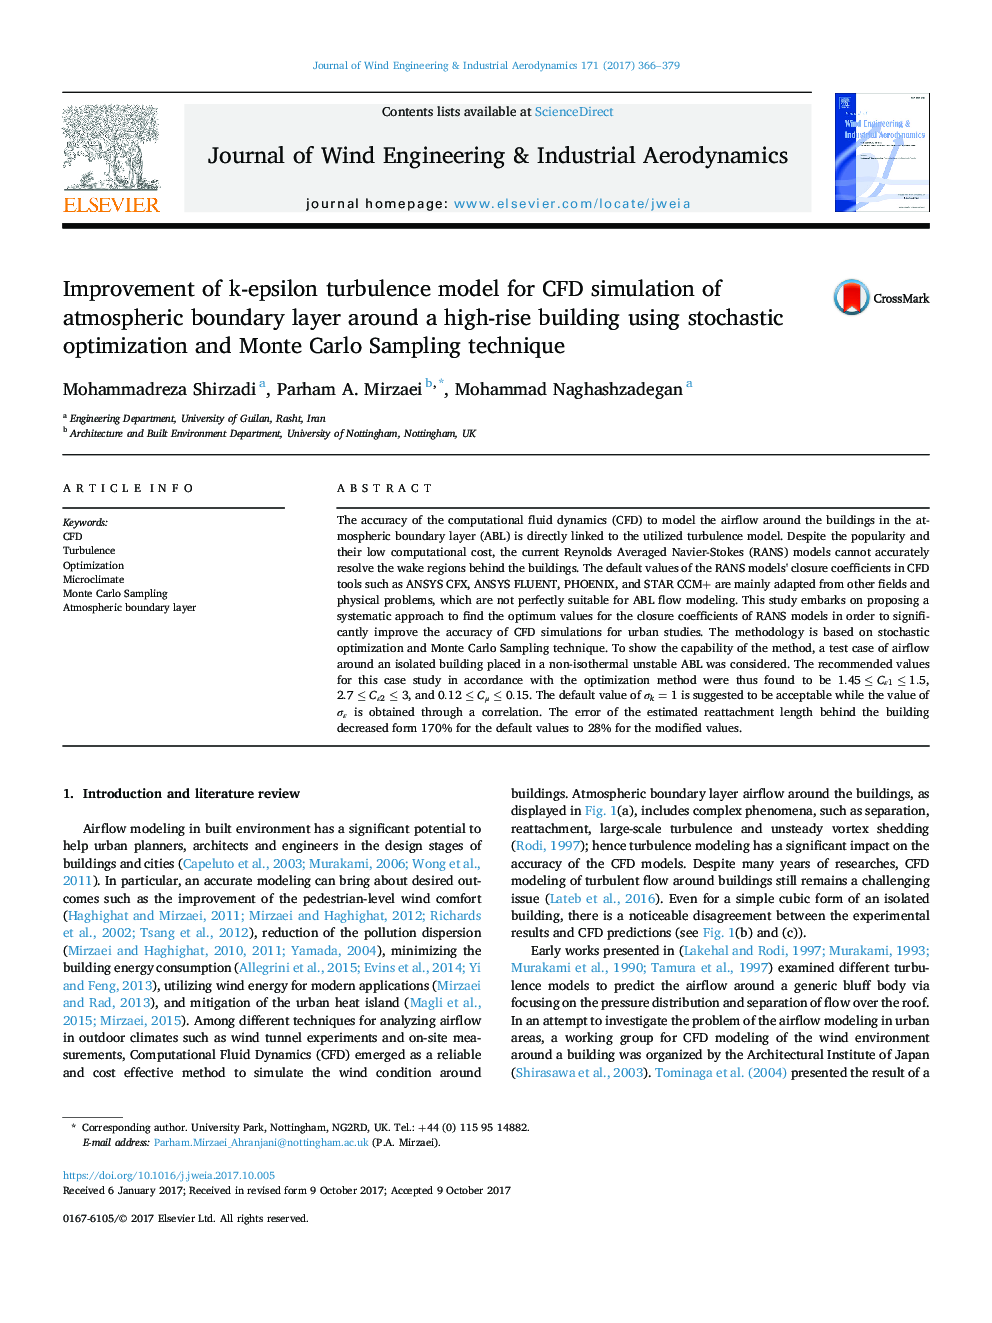 Improvement of k-epsilon turbulence model for CFD simulation of atmospheric boundary layer around a high-rise building using stochastic optimization and Monte Carlo Sampling technique